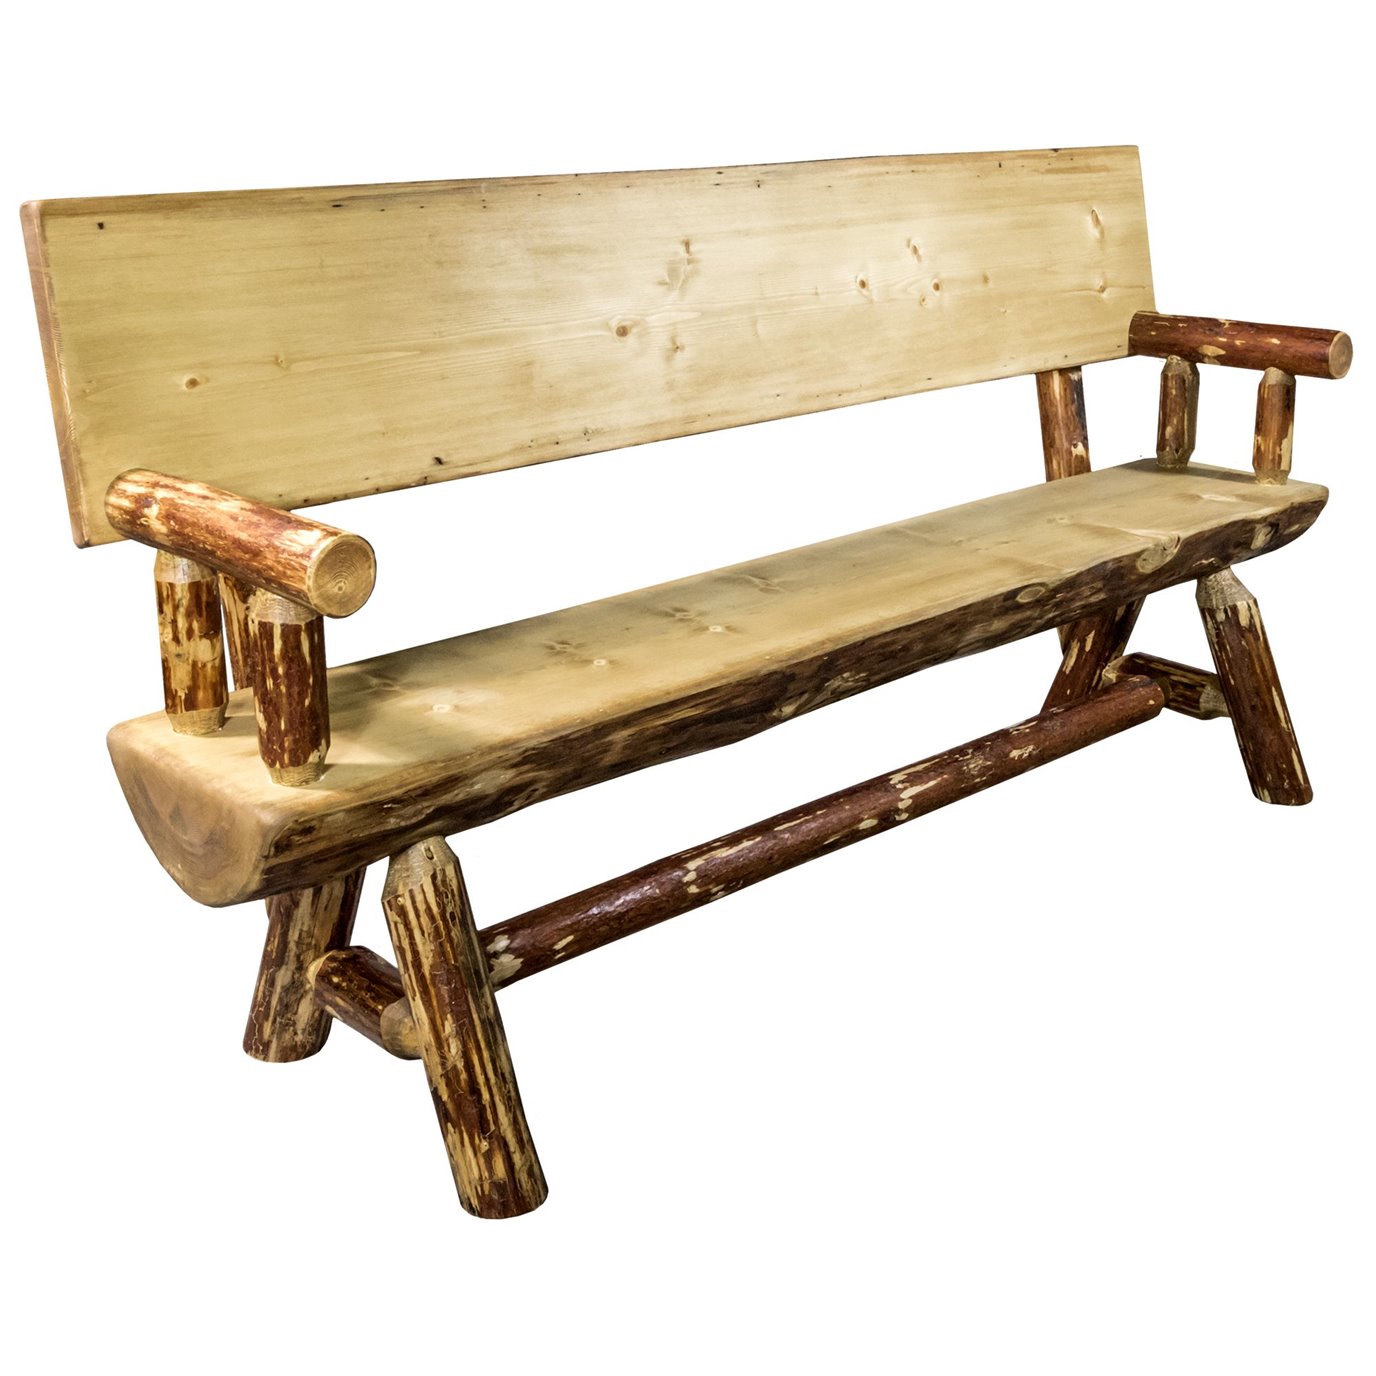 Glacier 6 Foot Half Log Bench w/ Back & Arms - Exterior Stain Finish